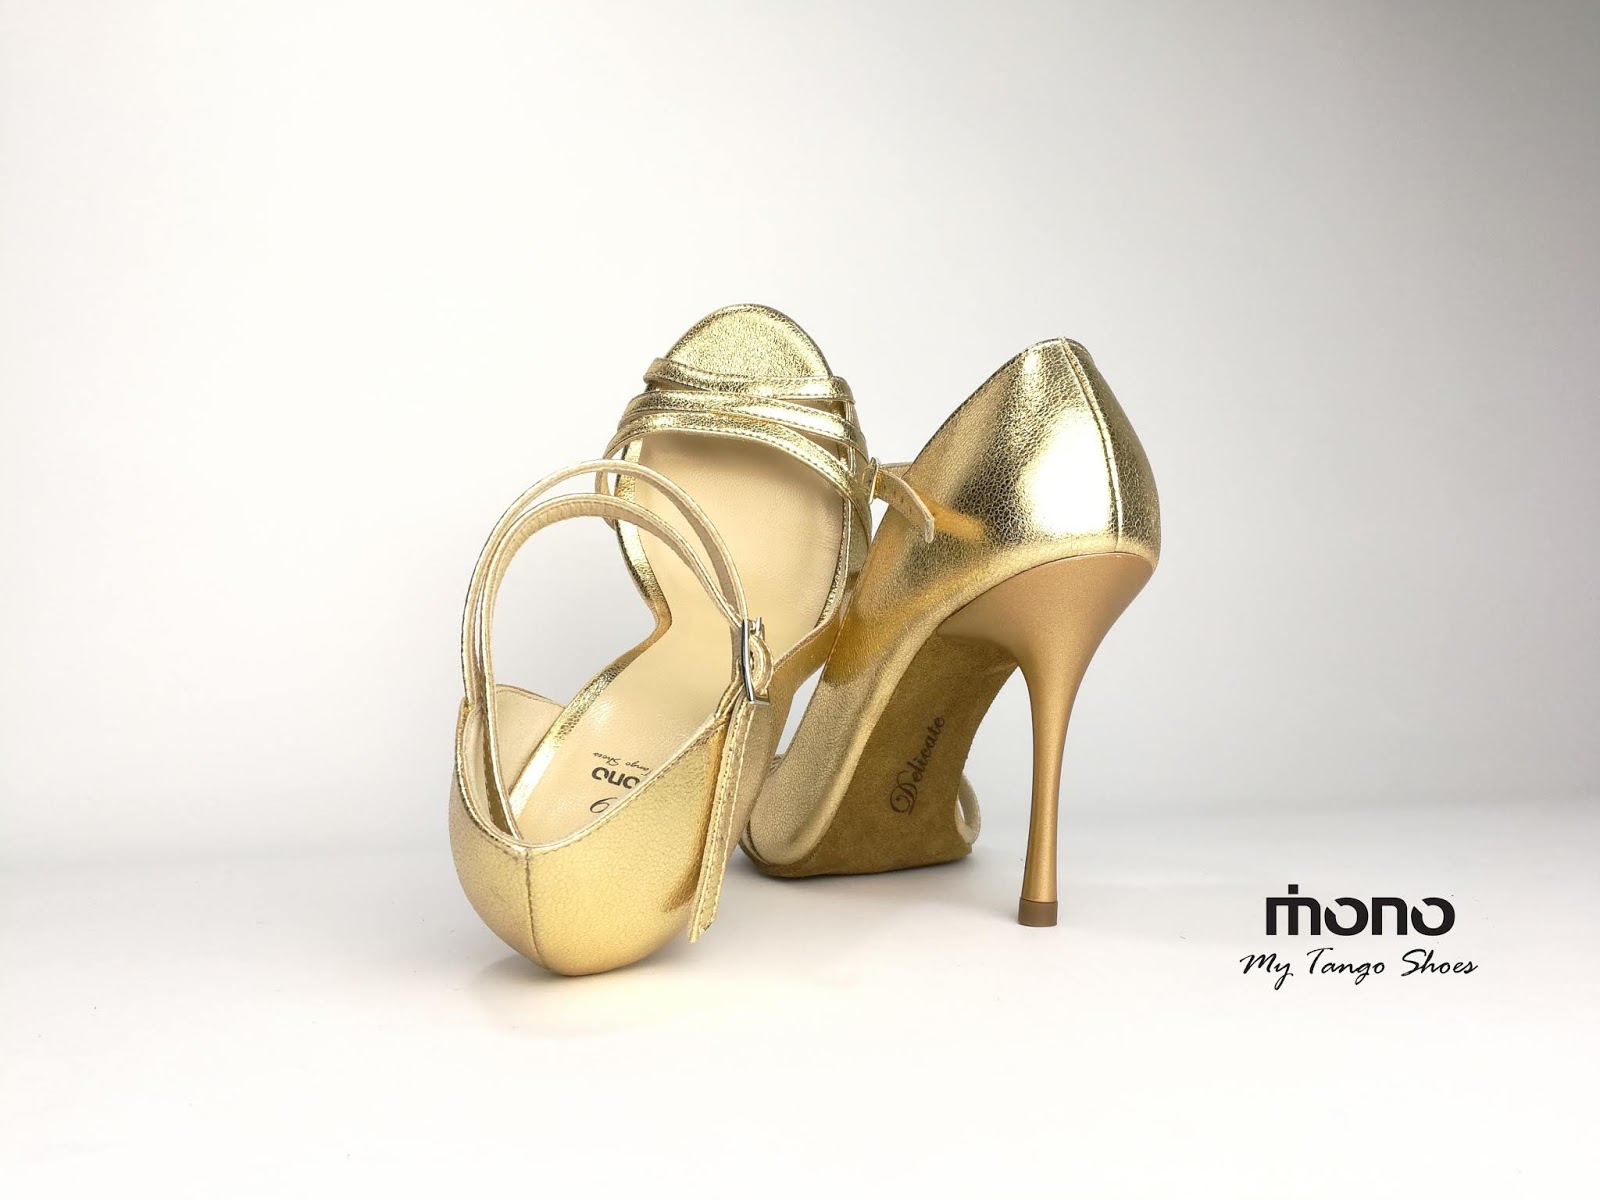 Exceed lamp is there My Tango Shoes by MONO: Delicate - confort for your feet